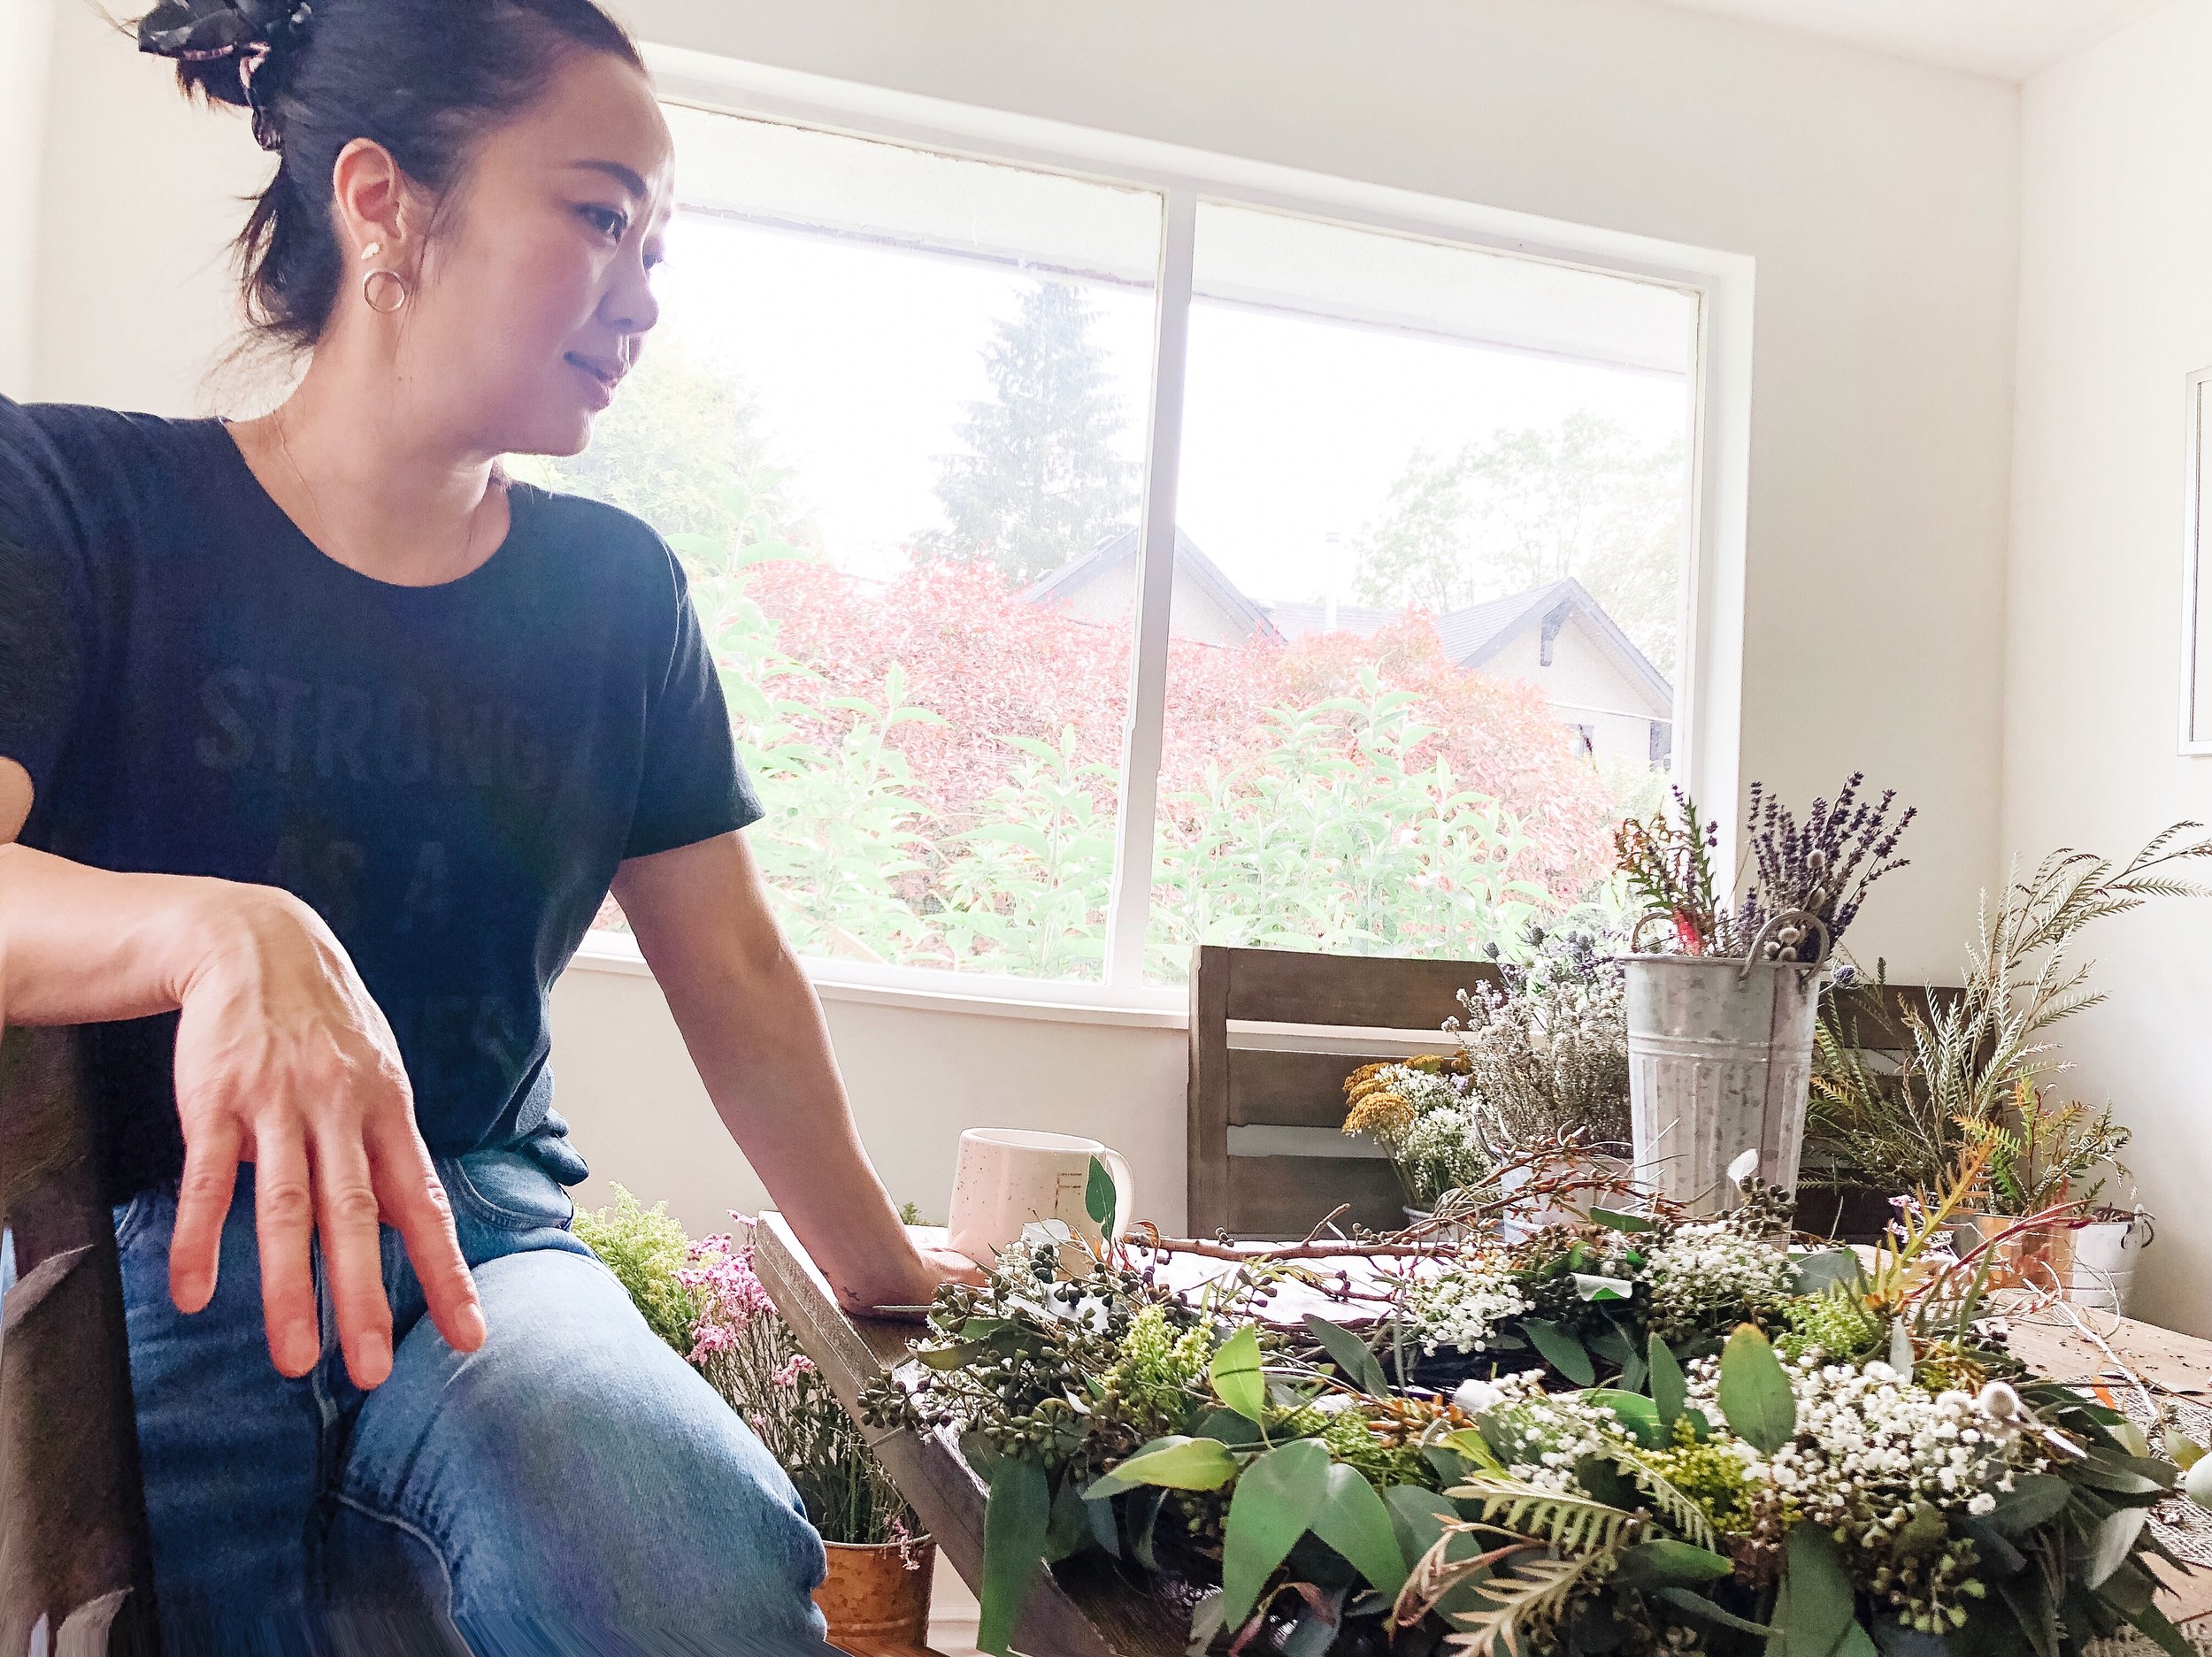 Meet Erica, the founder of Thistle Botanicals - Floral and Plants Design in Vancouver, BC